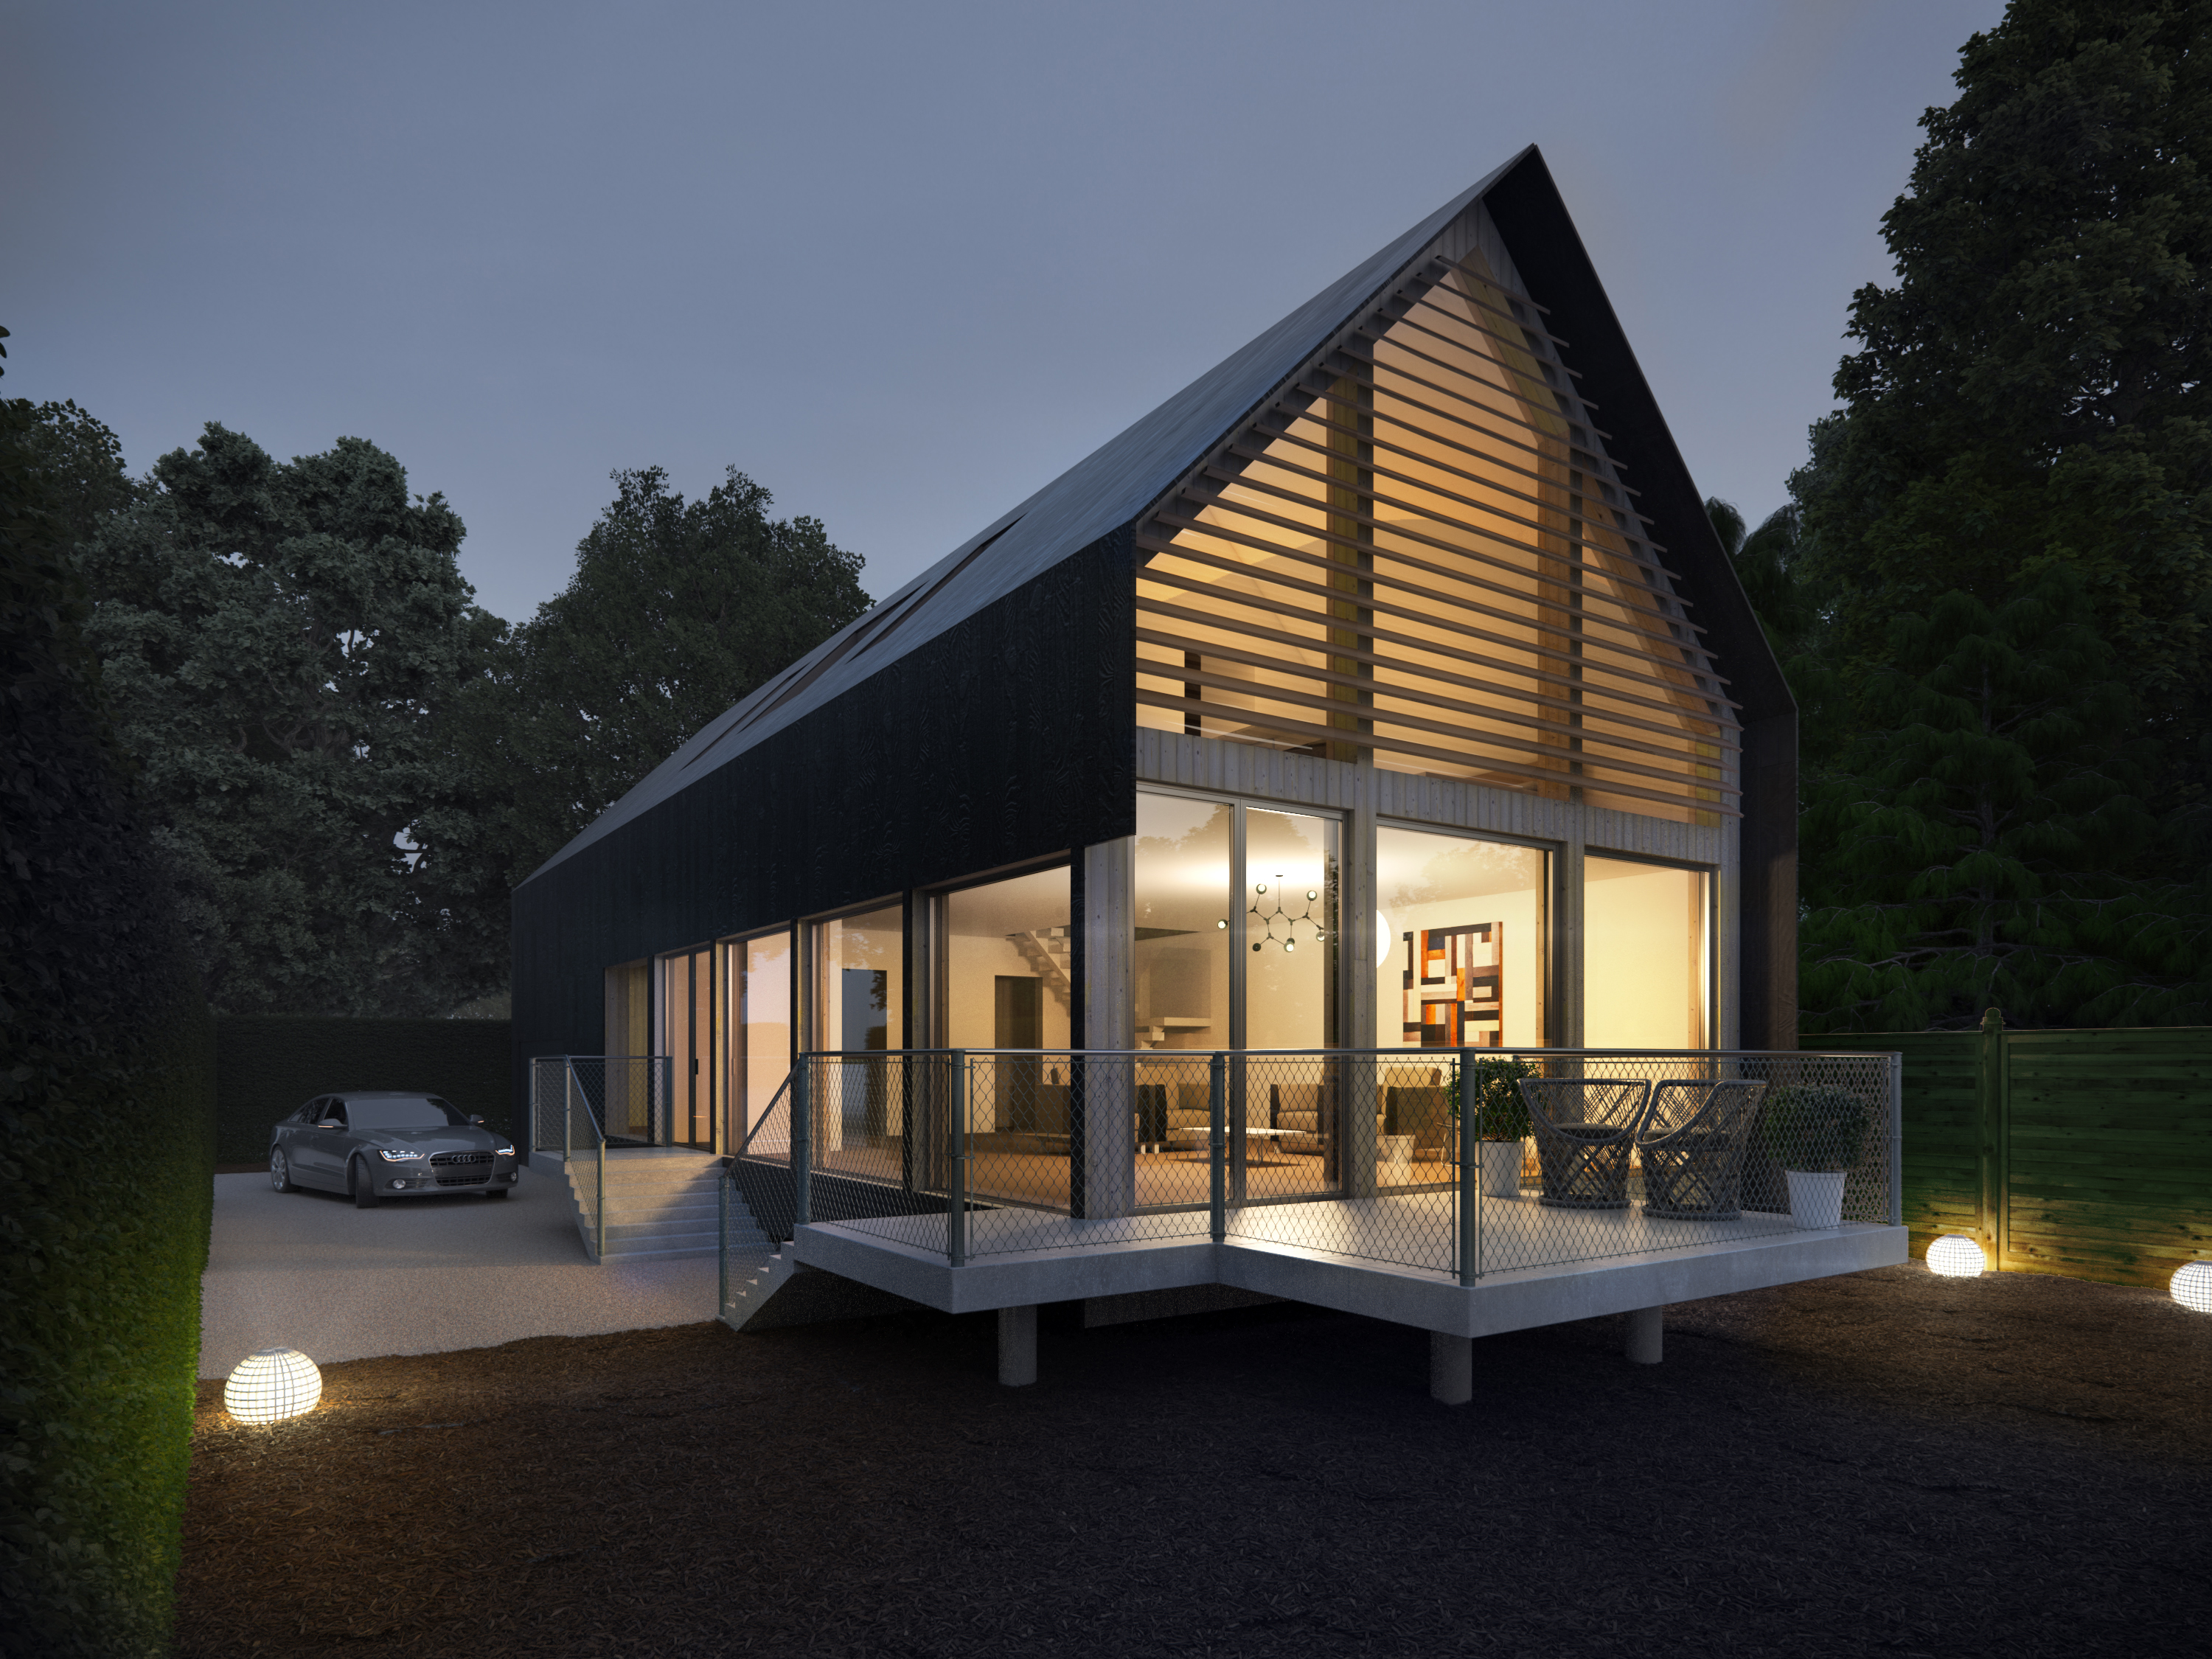 </p> <p>Find your ideal home design pro on designfor-me.com - get matched and see who's interested in your home project. Click image to see more inspiration from our design pros</p> <p>Design by Adam, architect from Poole, South West</p> <p>#architecture #homedesign #modernhomes #homeinspiration #selfbuilds #selfbuildinspiration #selfbuildideas #granddesigns </p> <p>